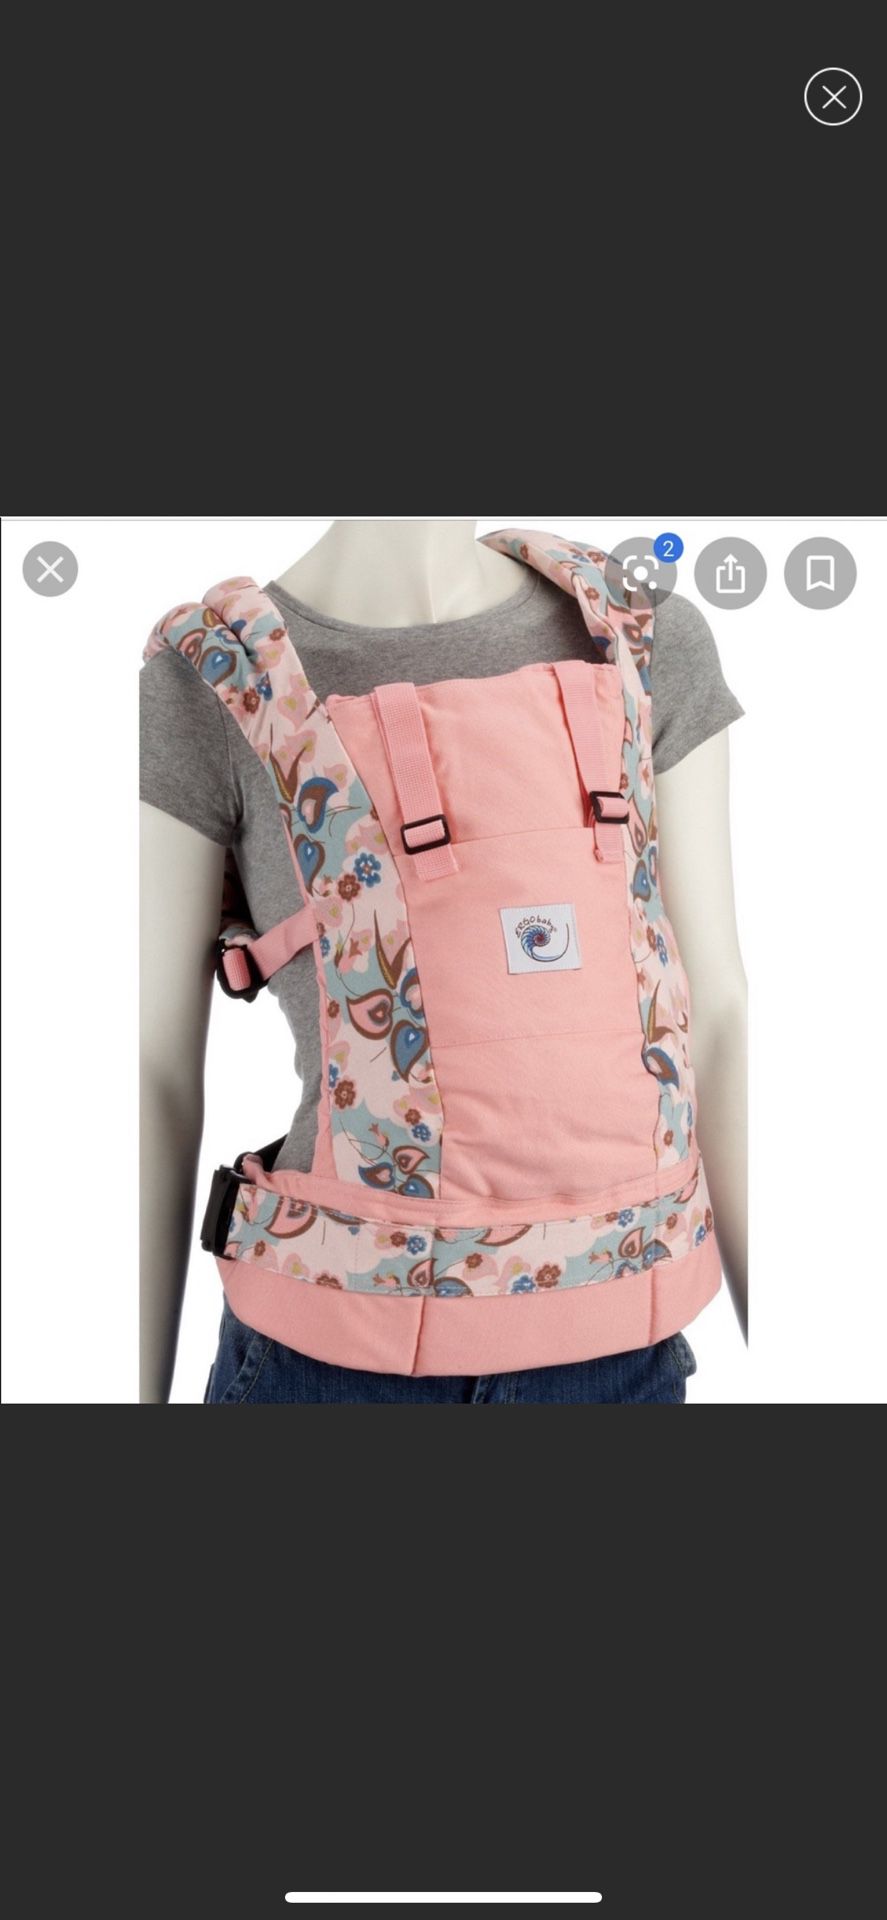 Ergobaby Hearts & Flowers Baby Carrier